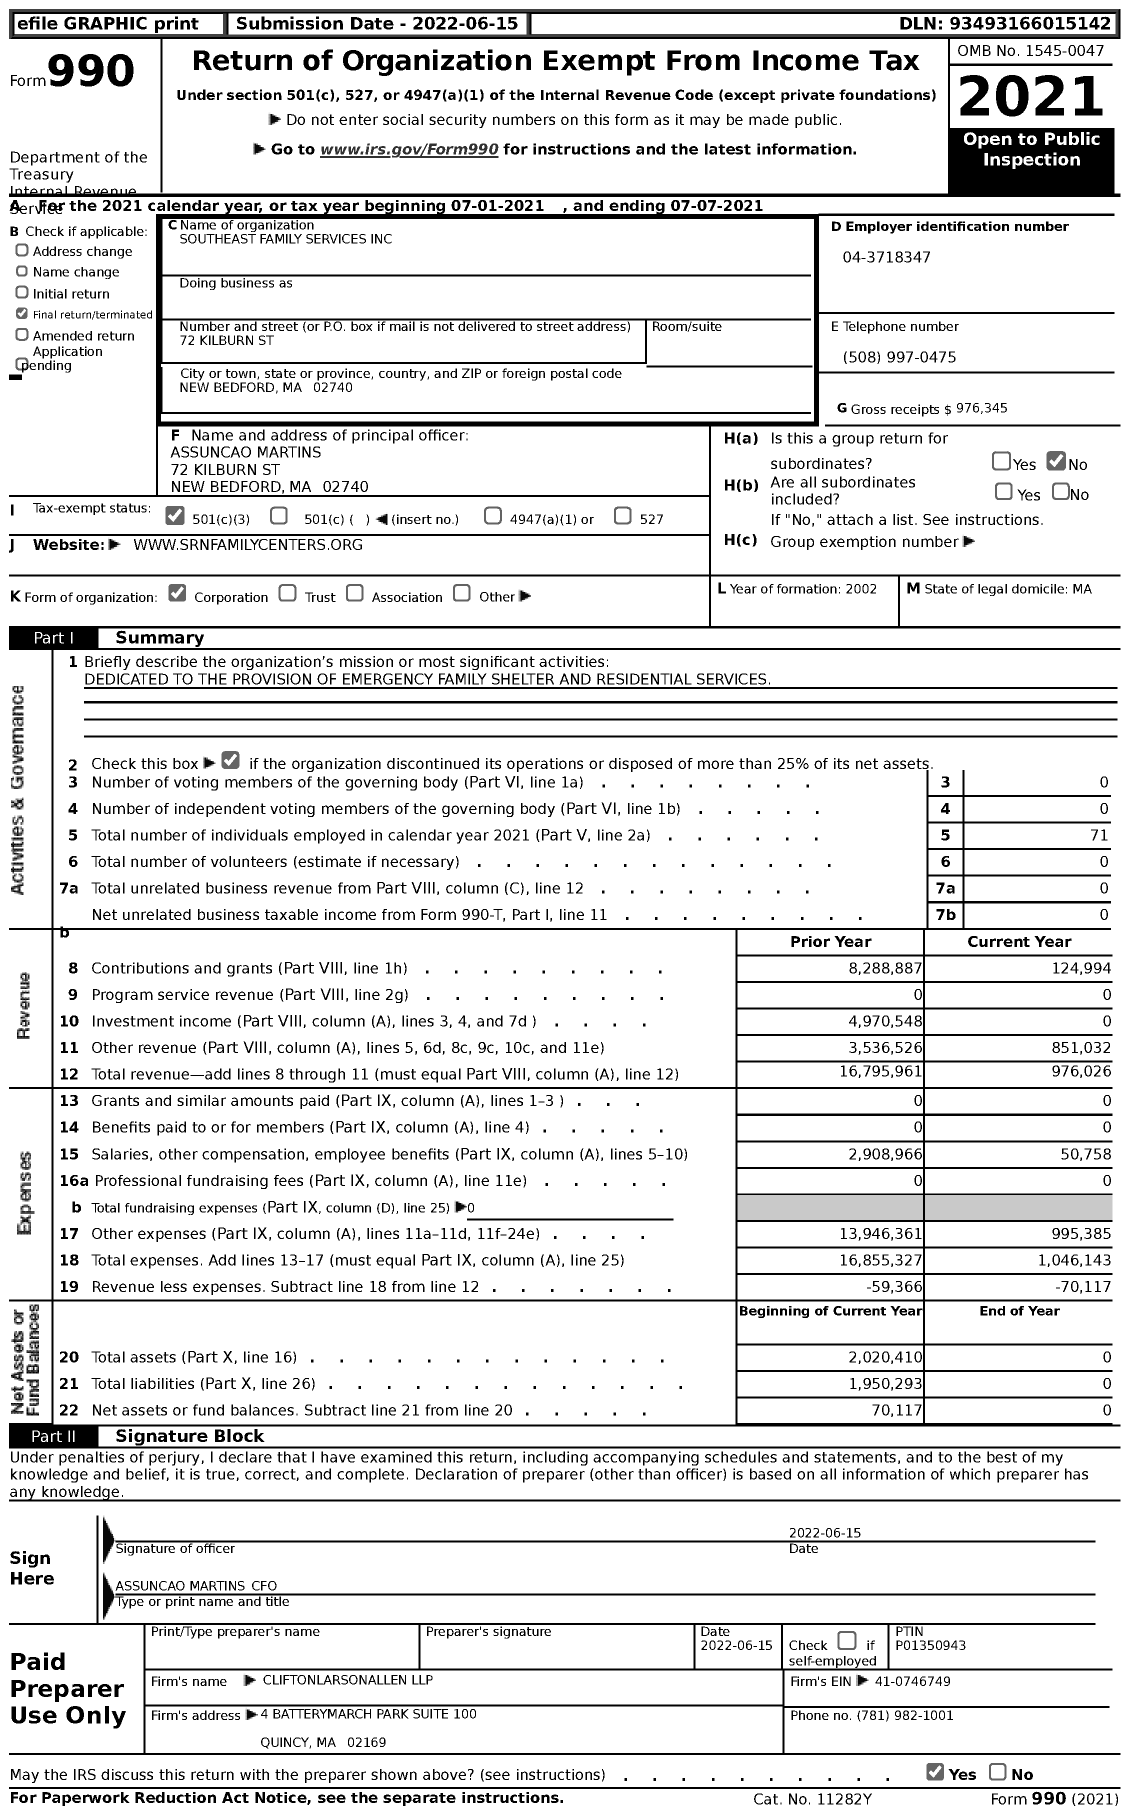 Image of first page of 2020 Form 990 for Southeast Family Services (SFS)